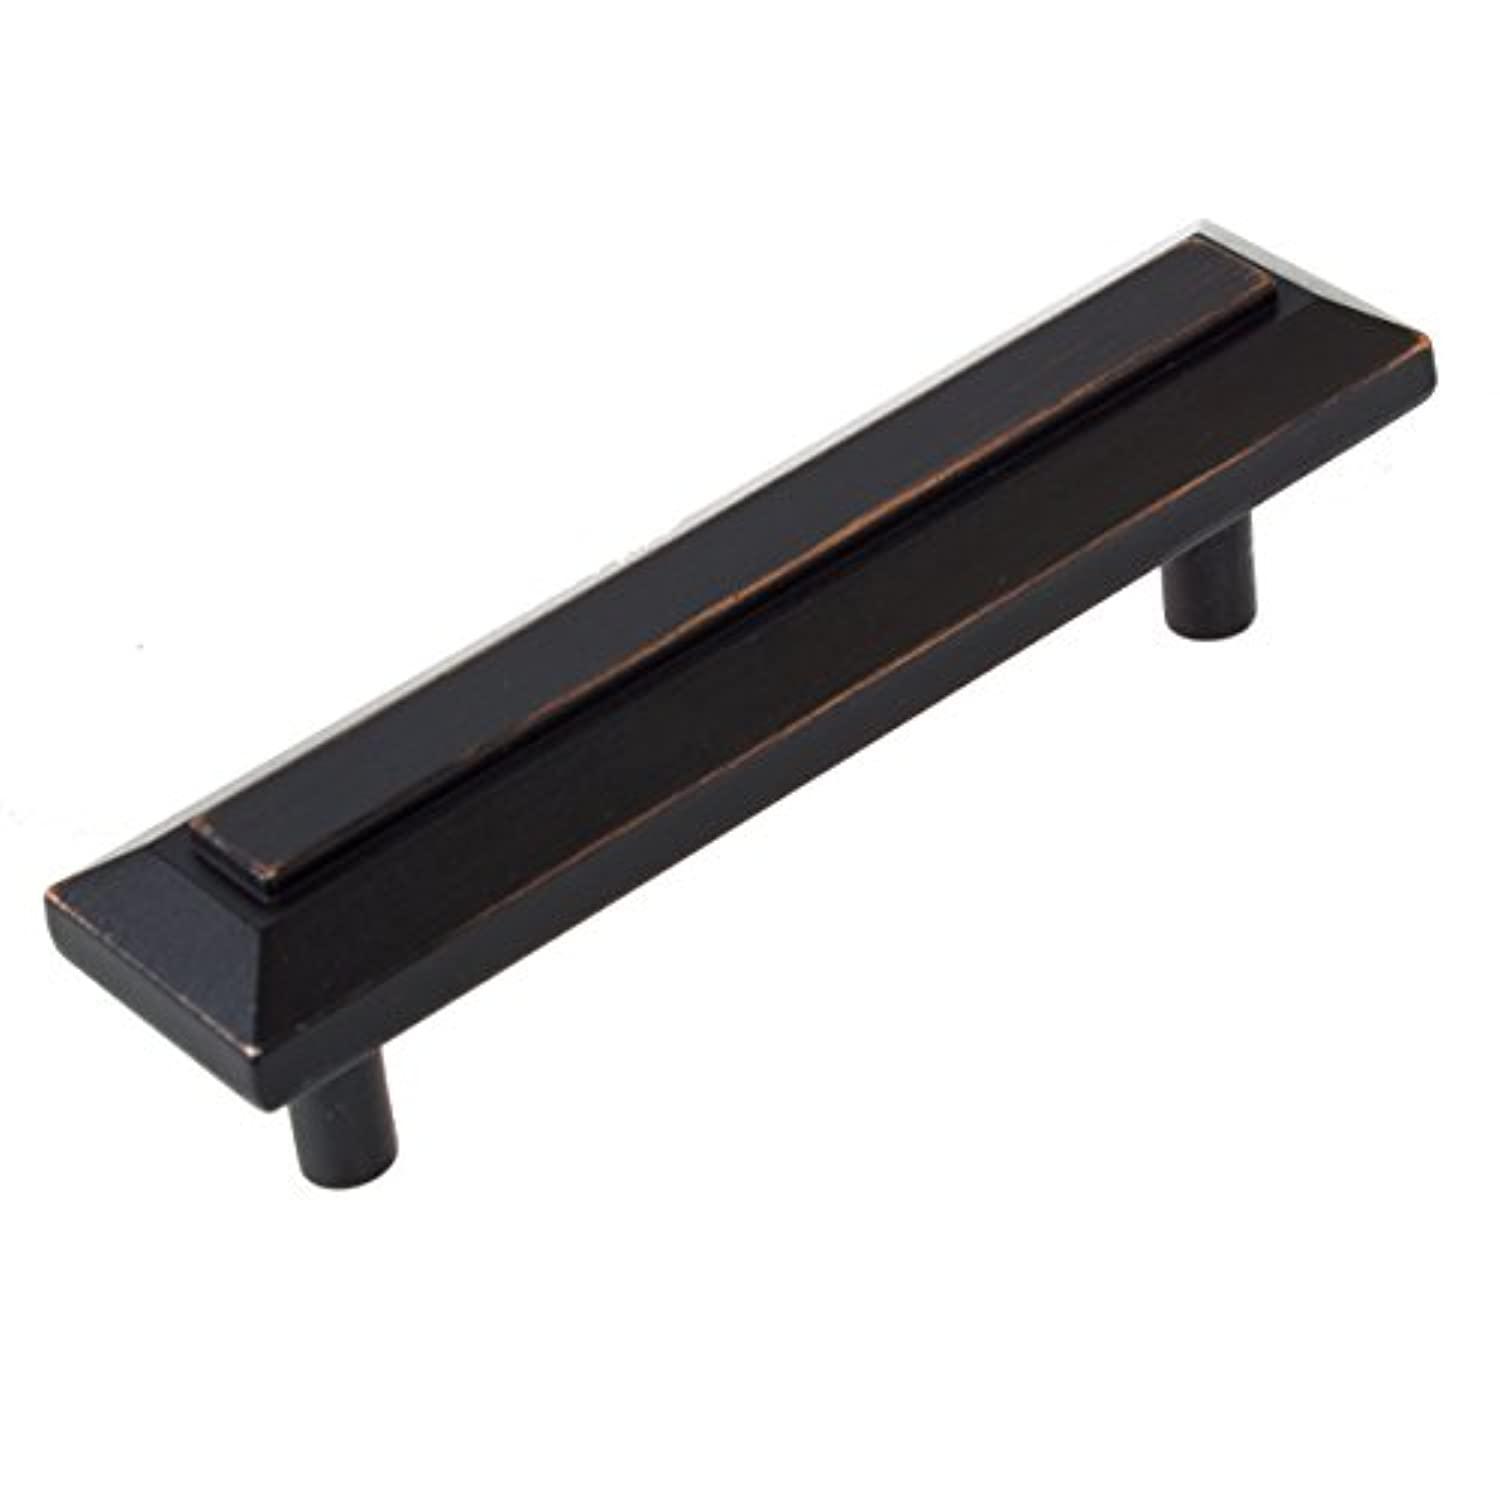 gliderite hardware 4362-orb-10 3 inch cc grooved rectangle cabinet pulls 10 pack, oil rubbed bronze finish